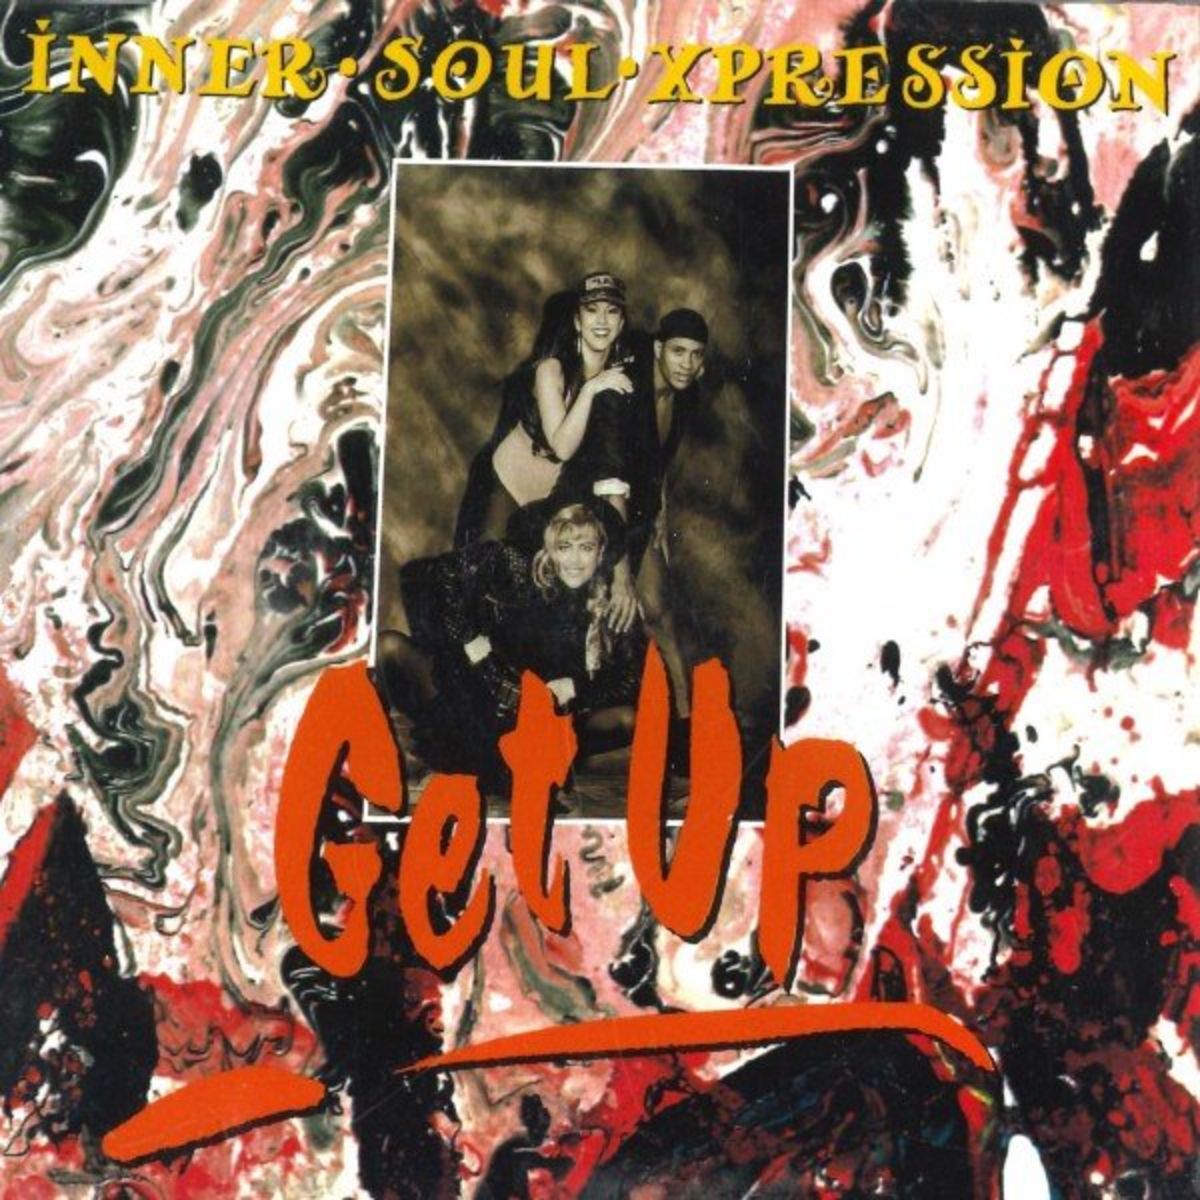 Inner Soul Xpression - Get Up (Web Single) SW GLOBAL (1993) FLAC